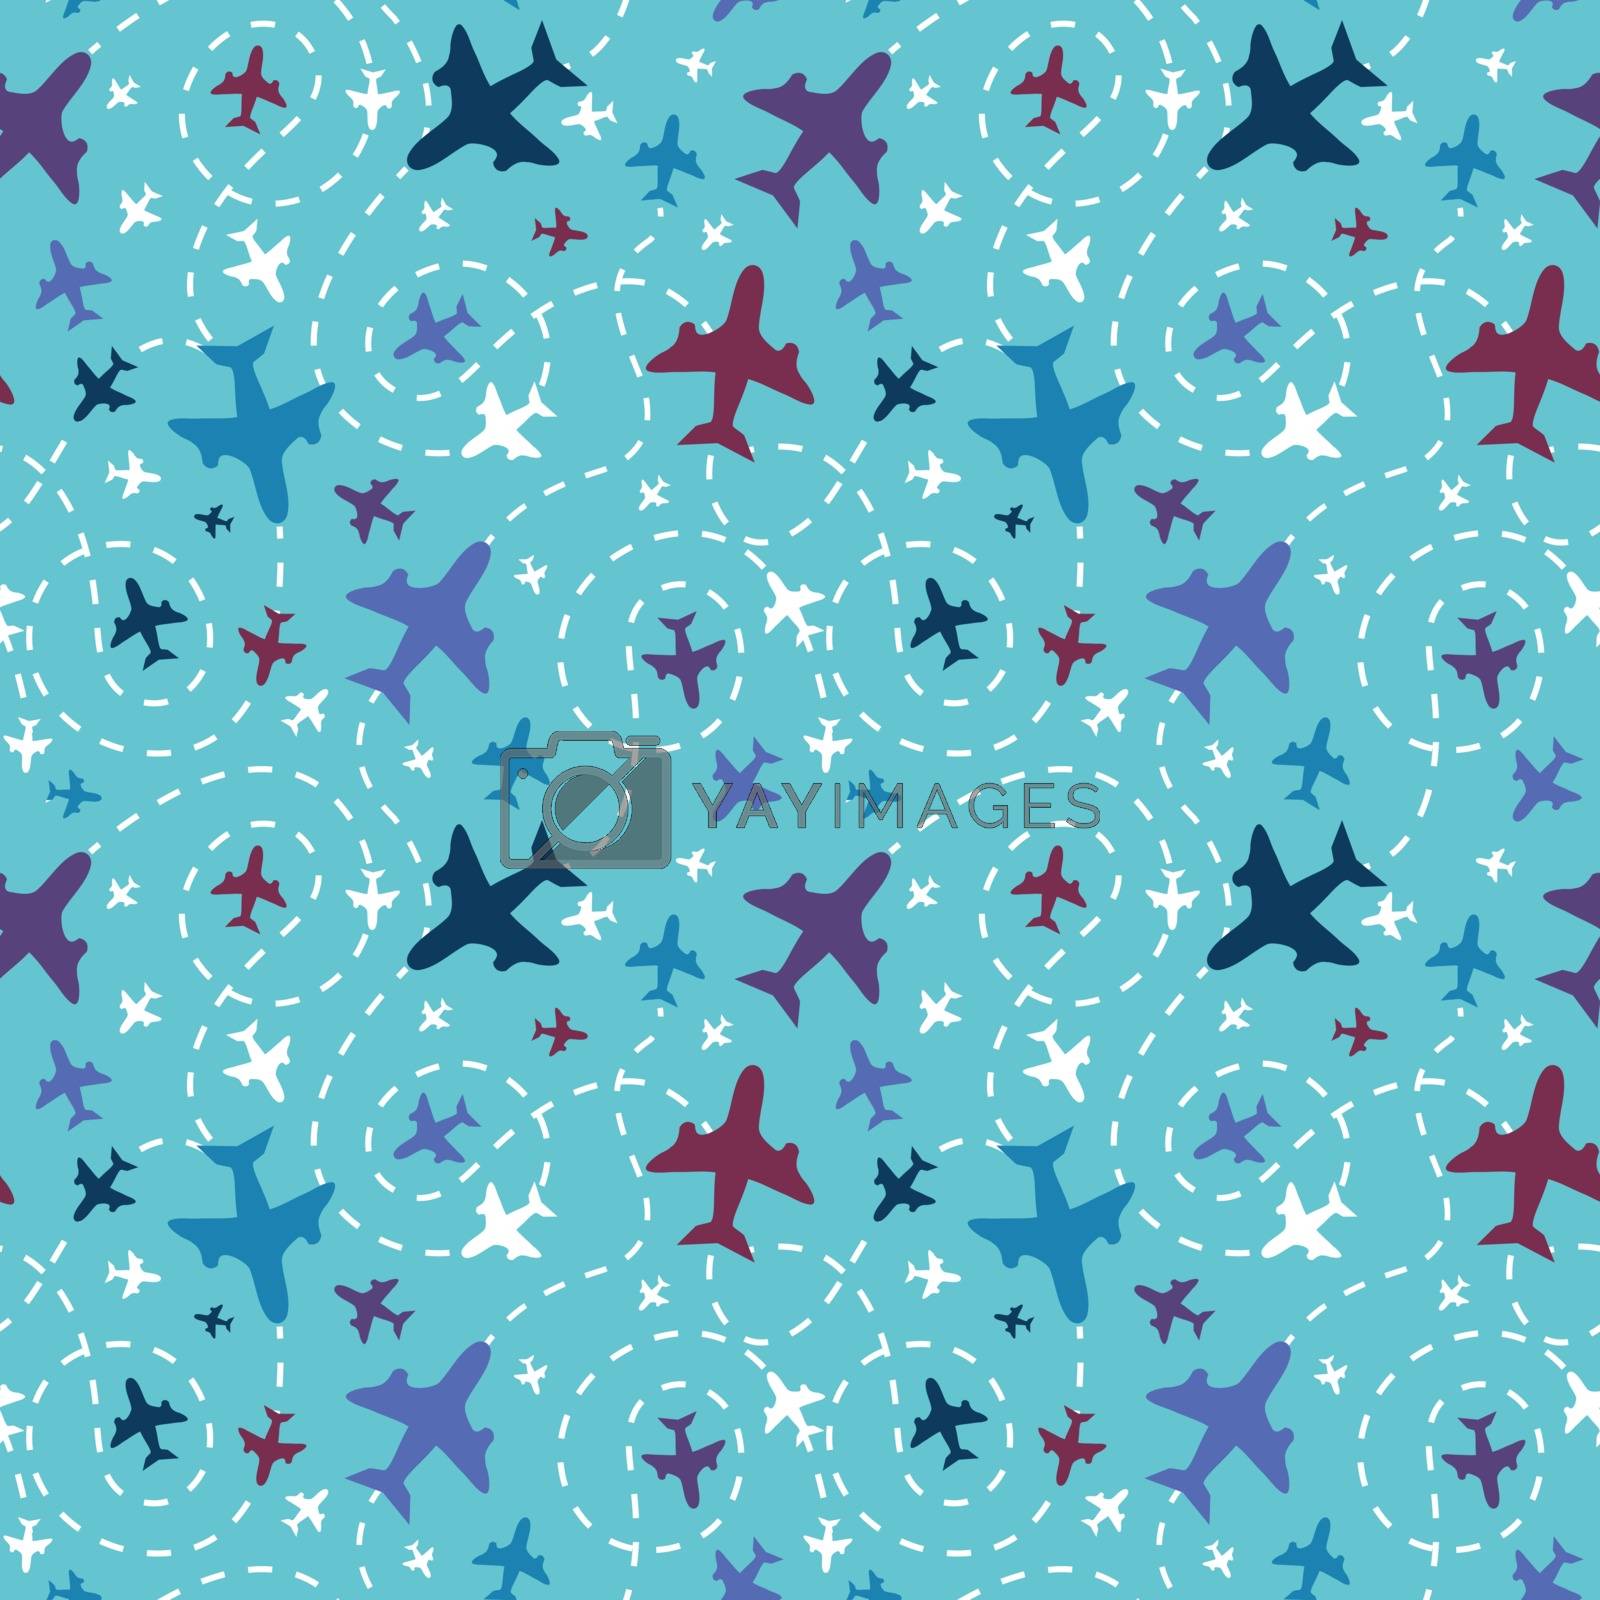 Royalty free image of Airplanes in the sky seamless pattern background by Oksancia